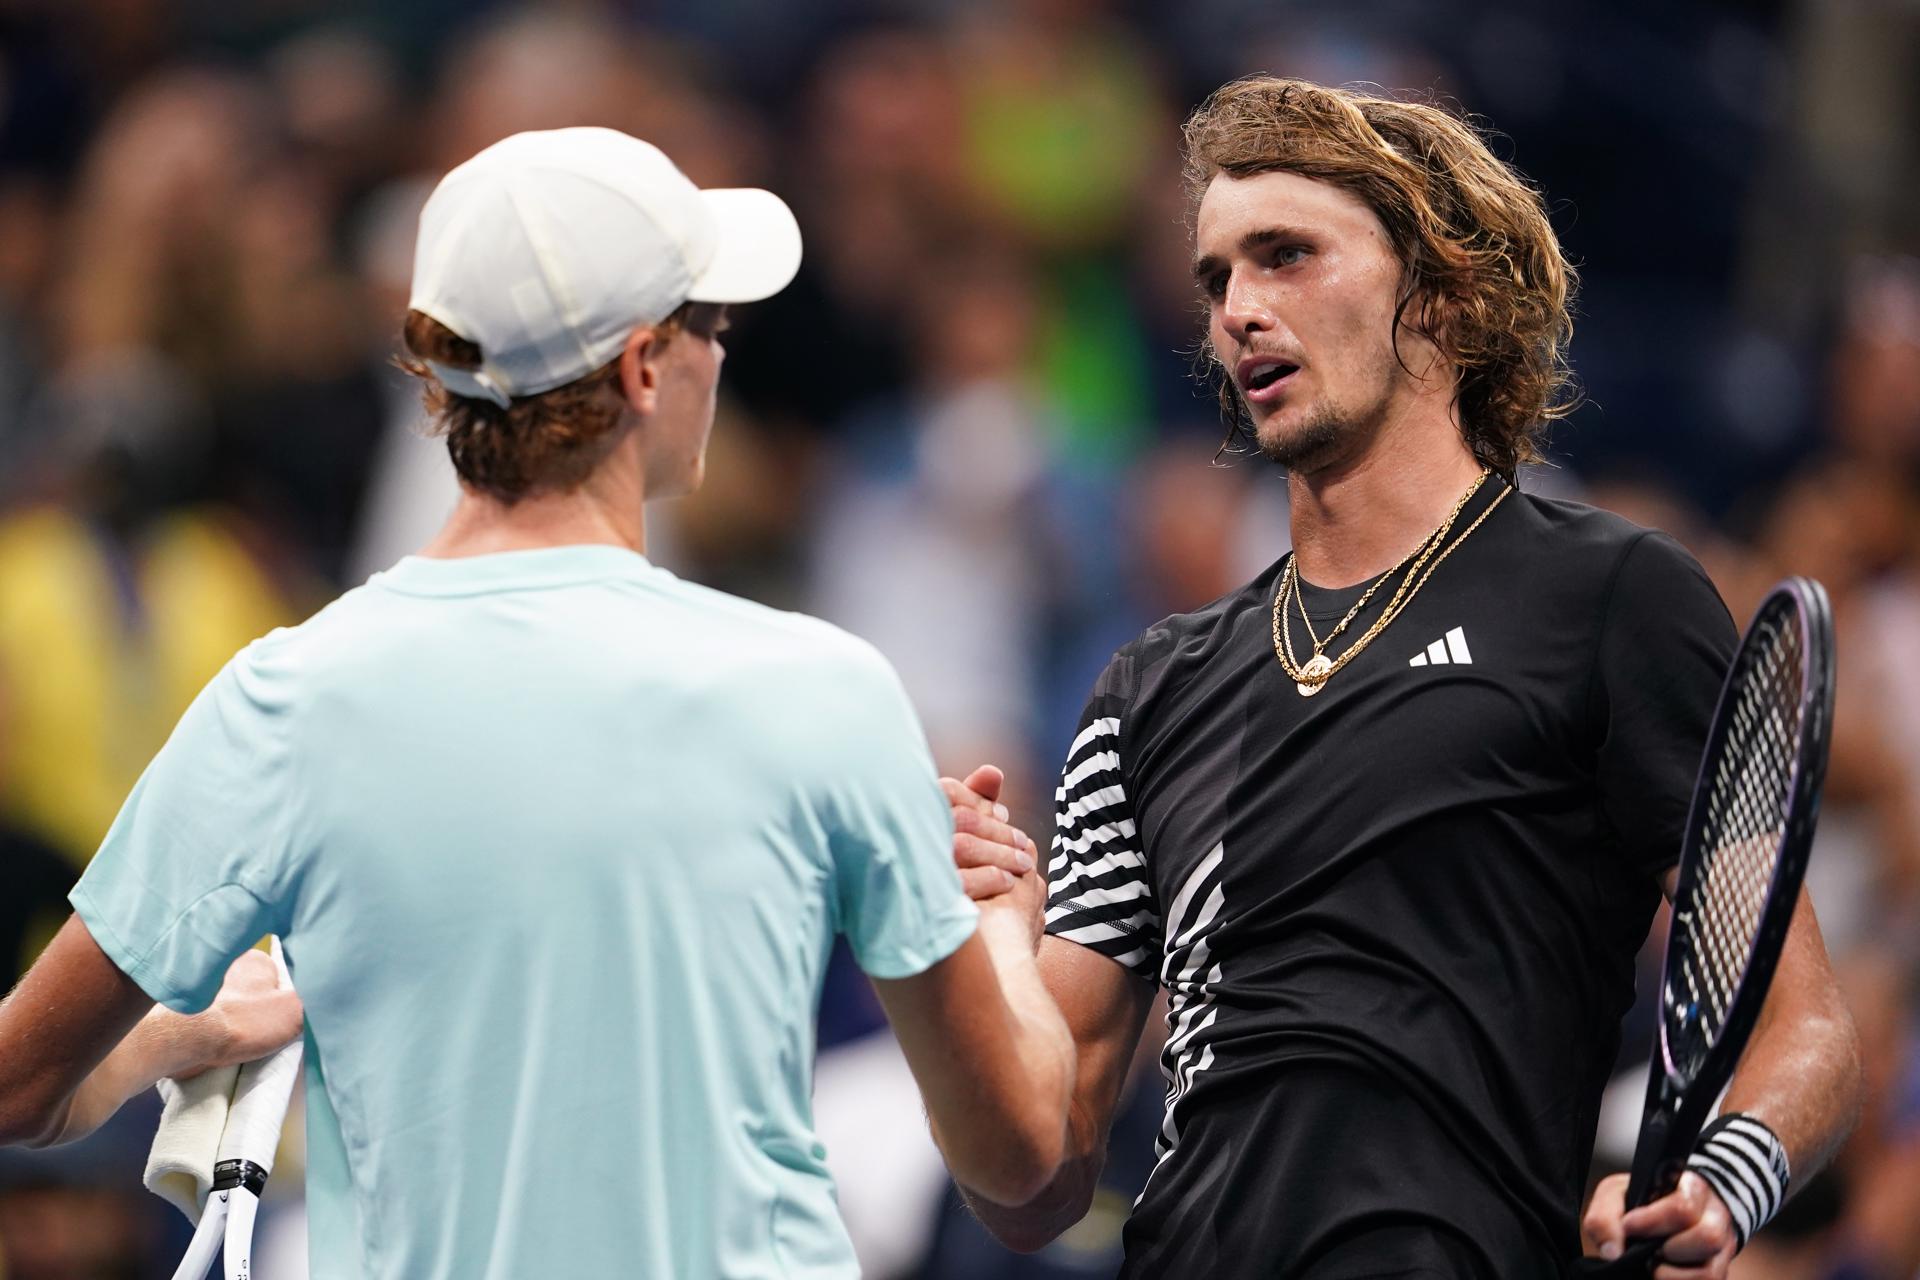 Alexander Zverev of Germany (R) embraces Jannik Sinner of Italy after winning their fourth round match at the US Open Tennis Championships at the USTA National Tennis Center in Flushing Meadows, New York, USA, 04 September 2023. EFE-EPA/WILL OLIVER
